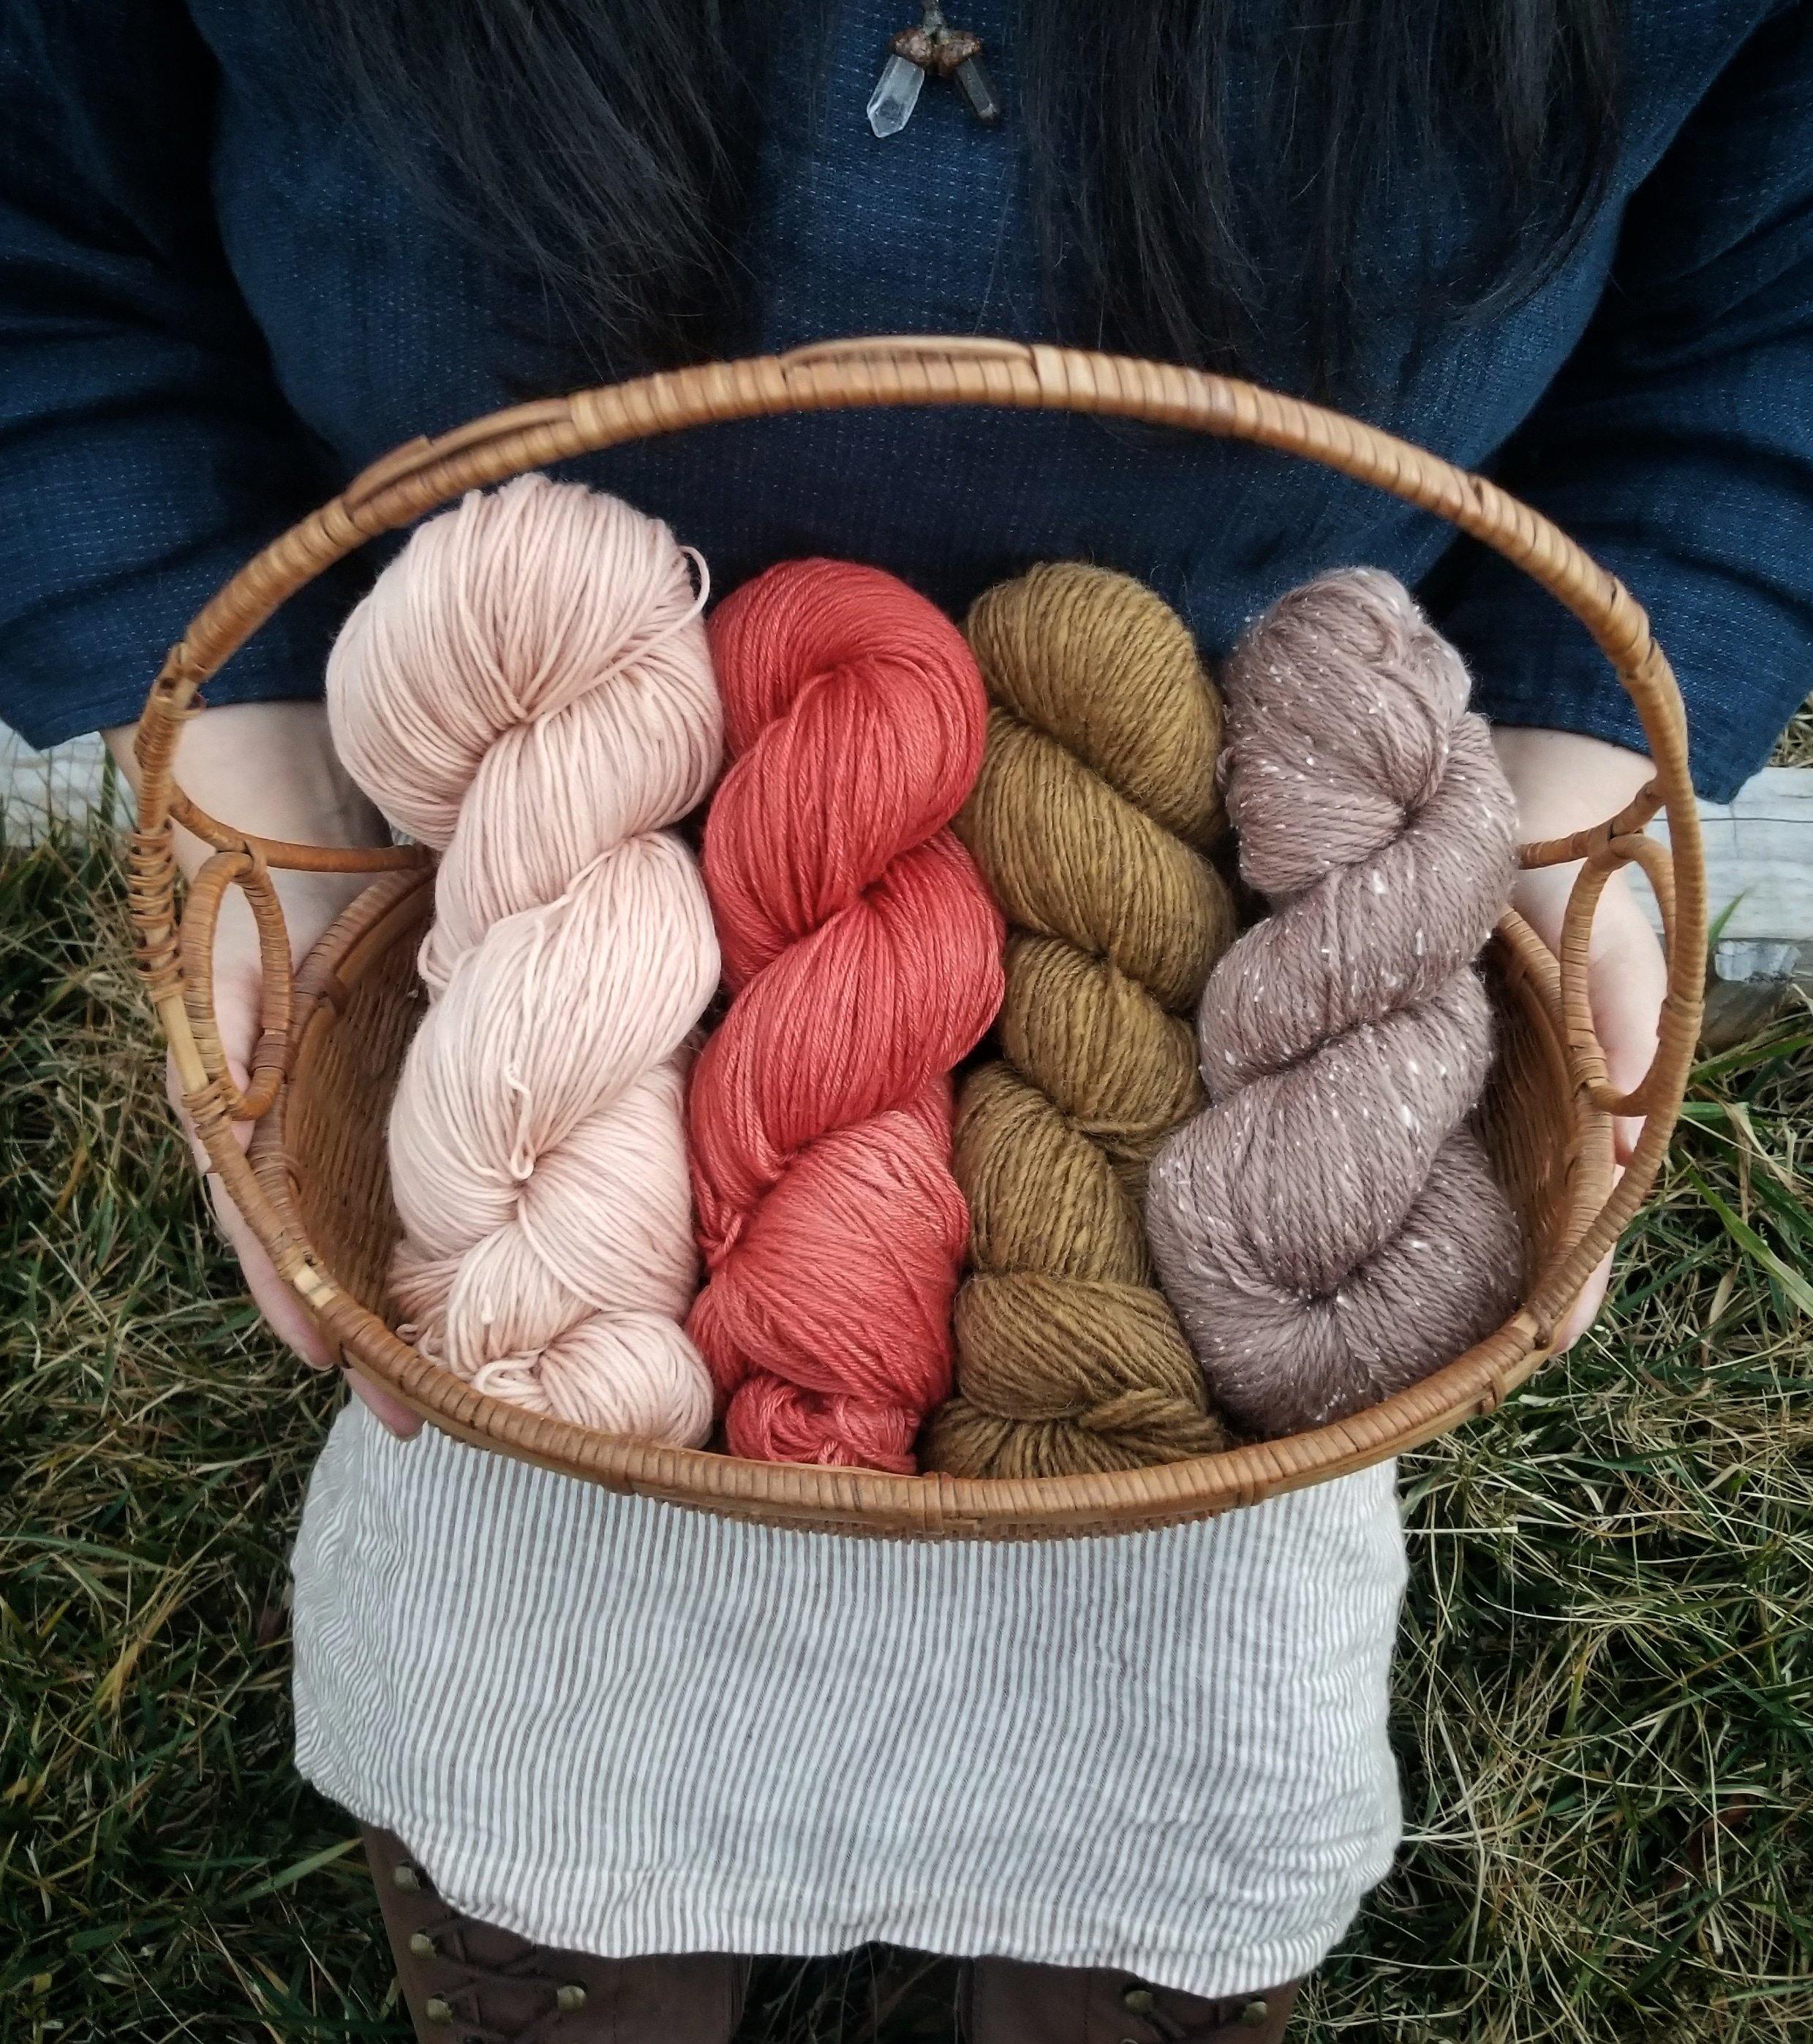 A Day in the Life of a Fiber Artist: Maria - Pyne and Smith Clothiers